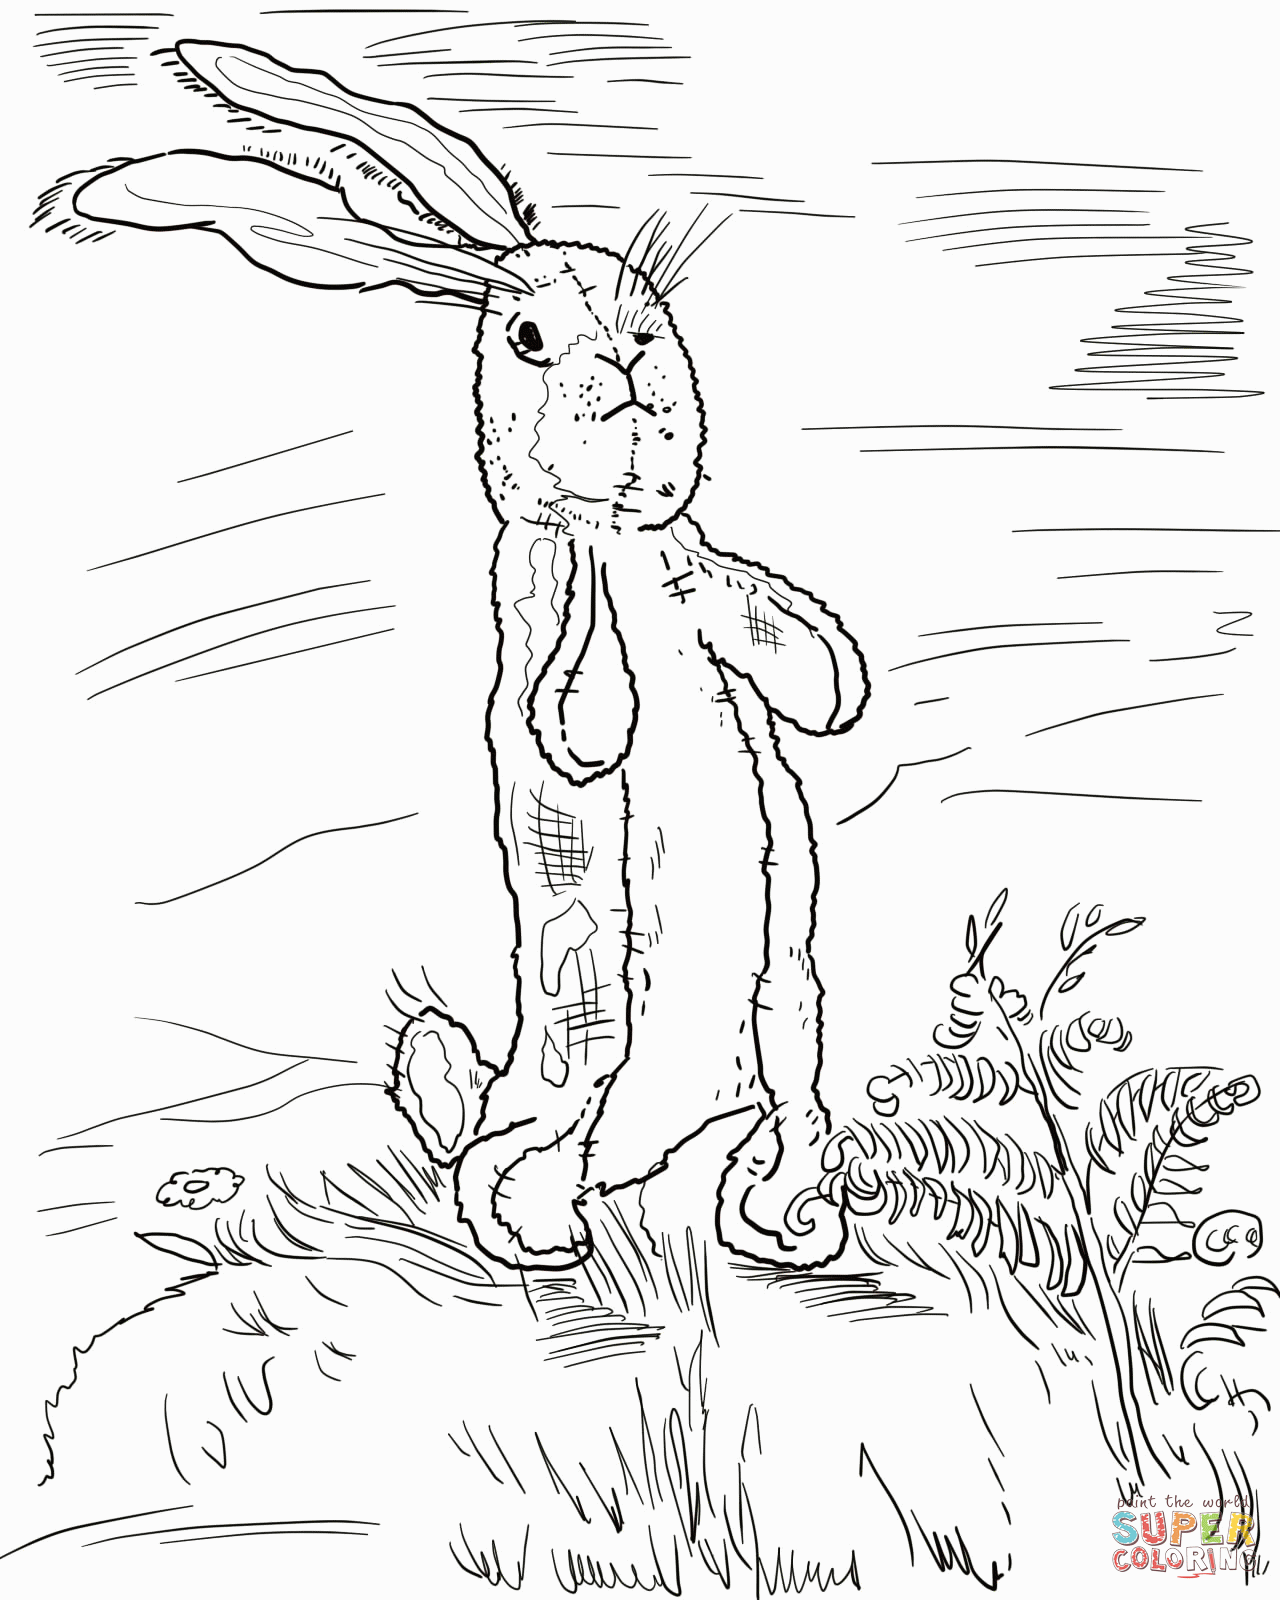 Velveteen rabbit animal coloring page for kids